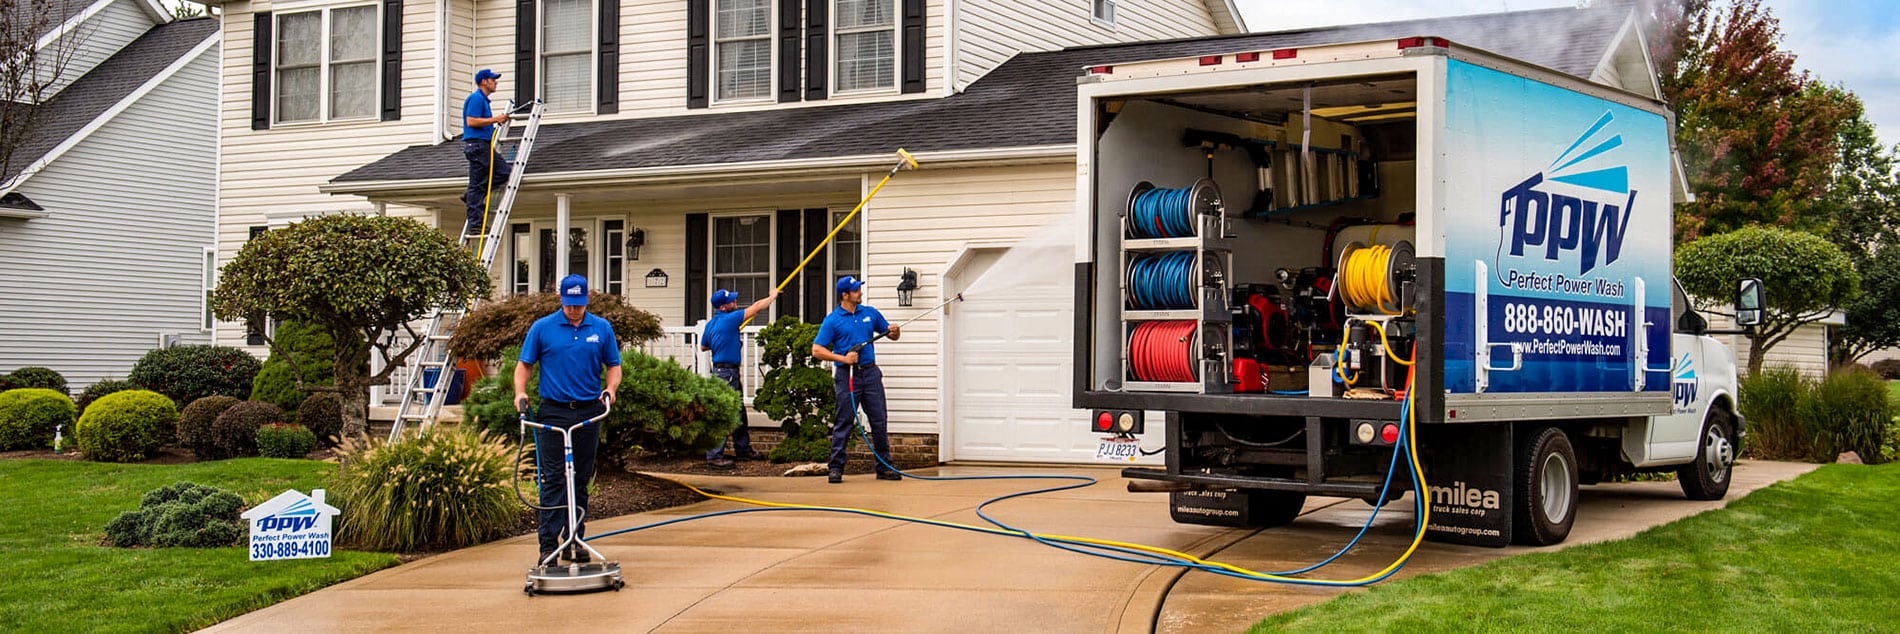 House Washing Services in Broussard LA